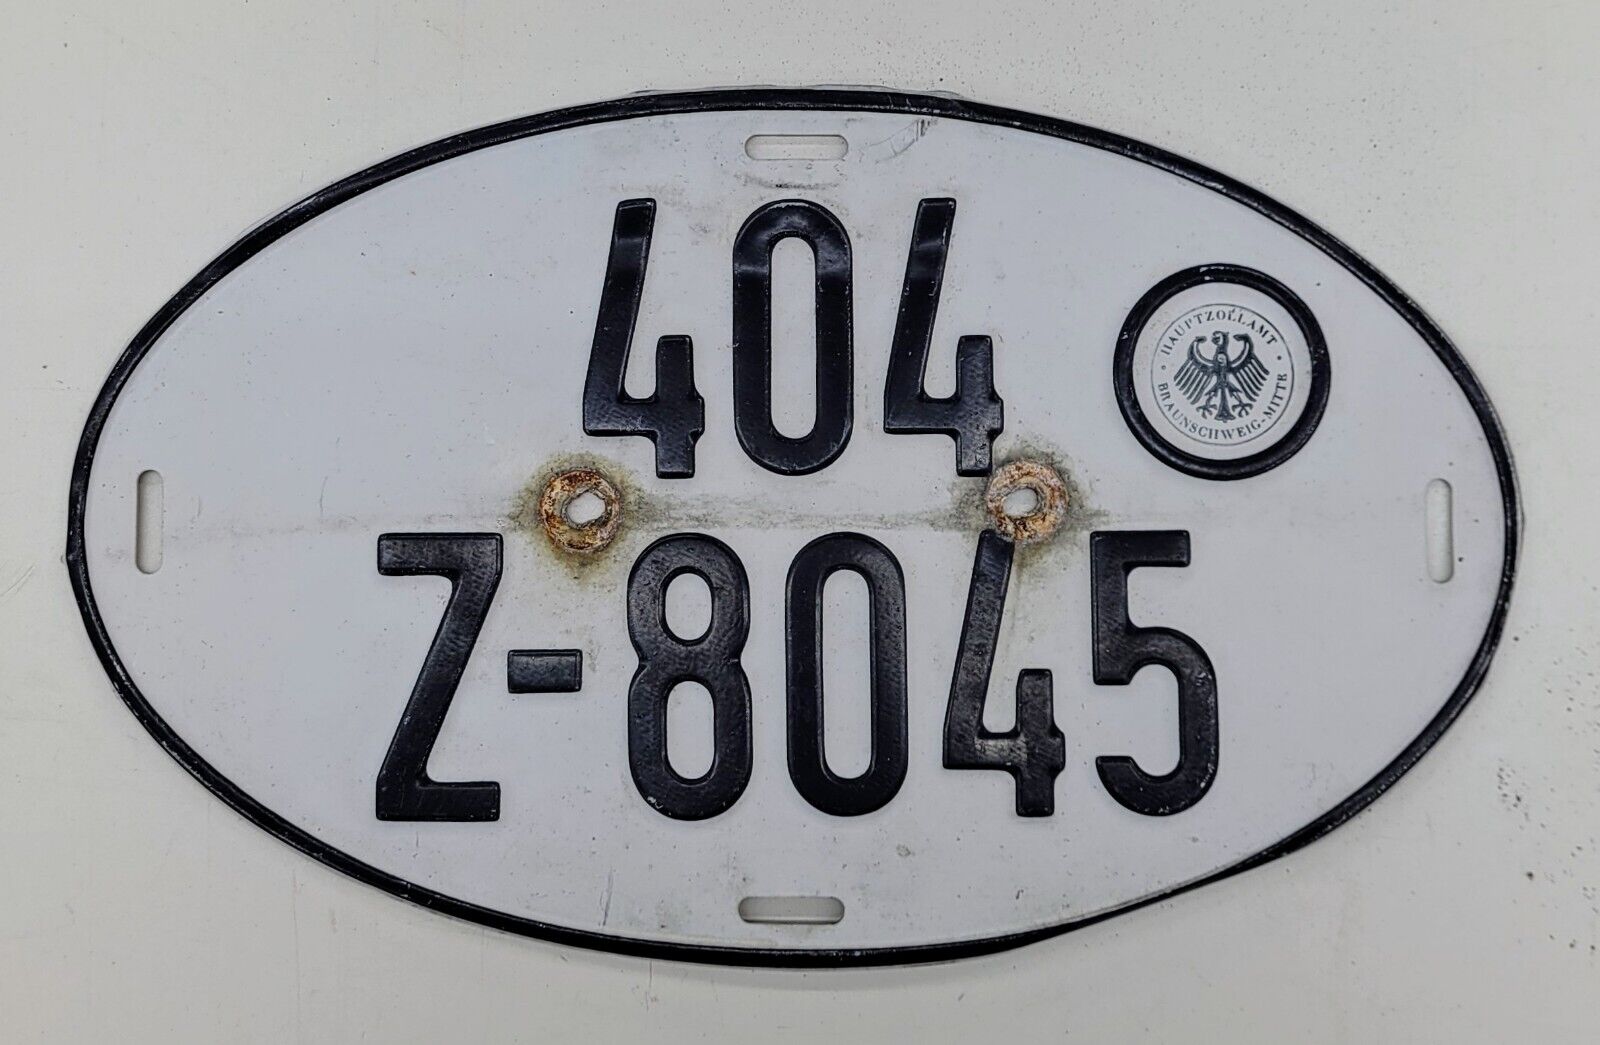 GERMAN Oval License Plate 🔥FREE SHIPPING🔥 VINTAGE GERMANY ~ 404 Z 8045